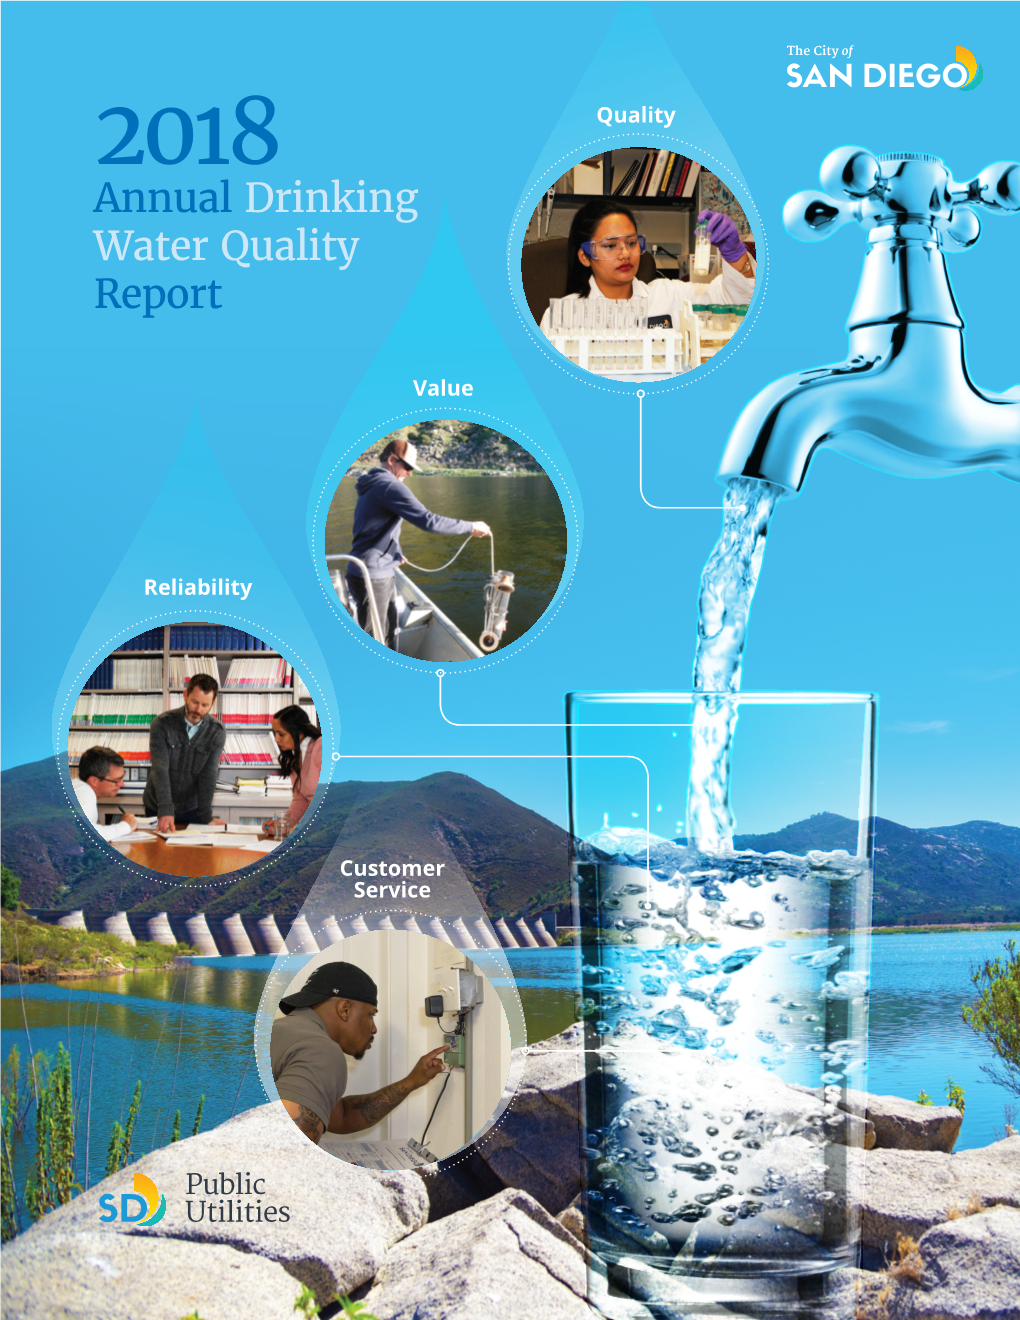 2018 Annual Drinking Water Quality Report